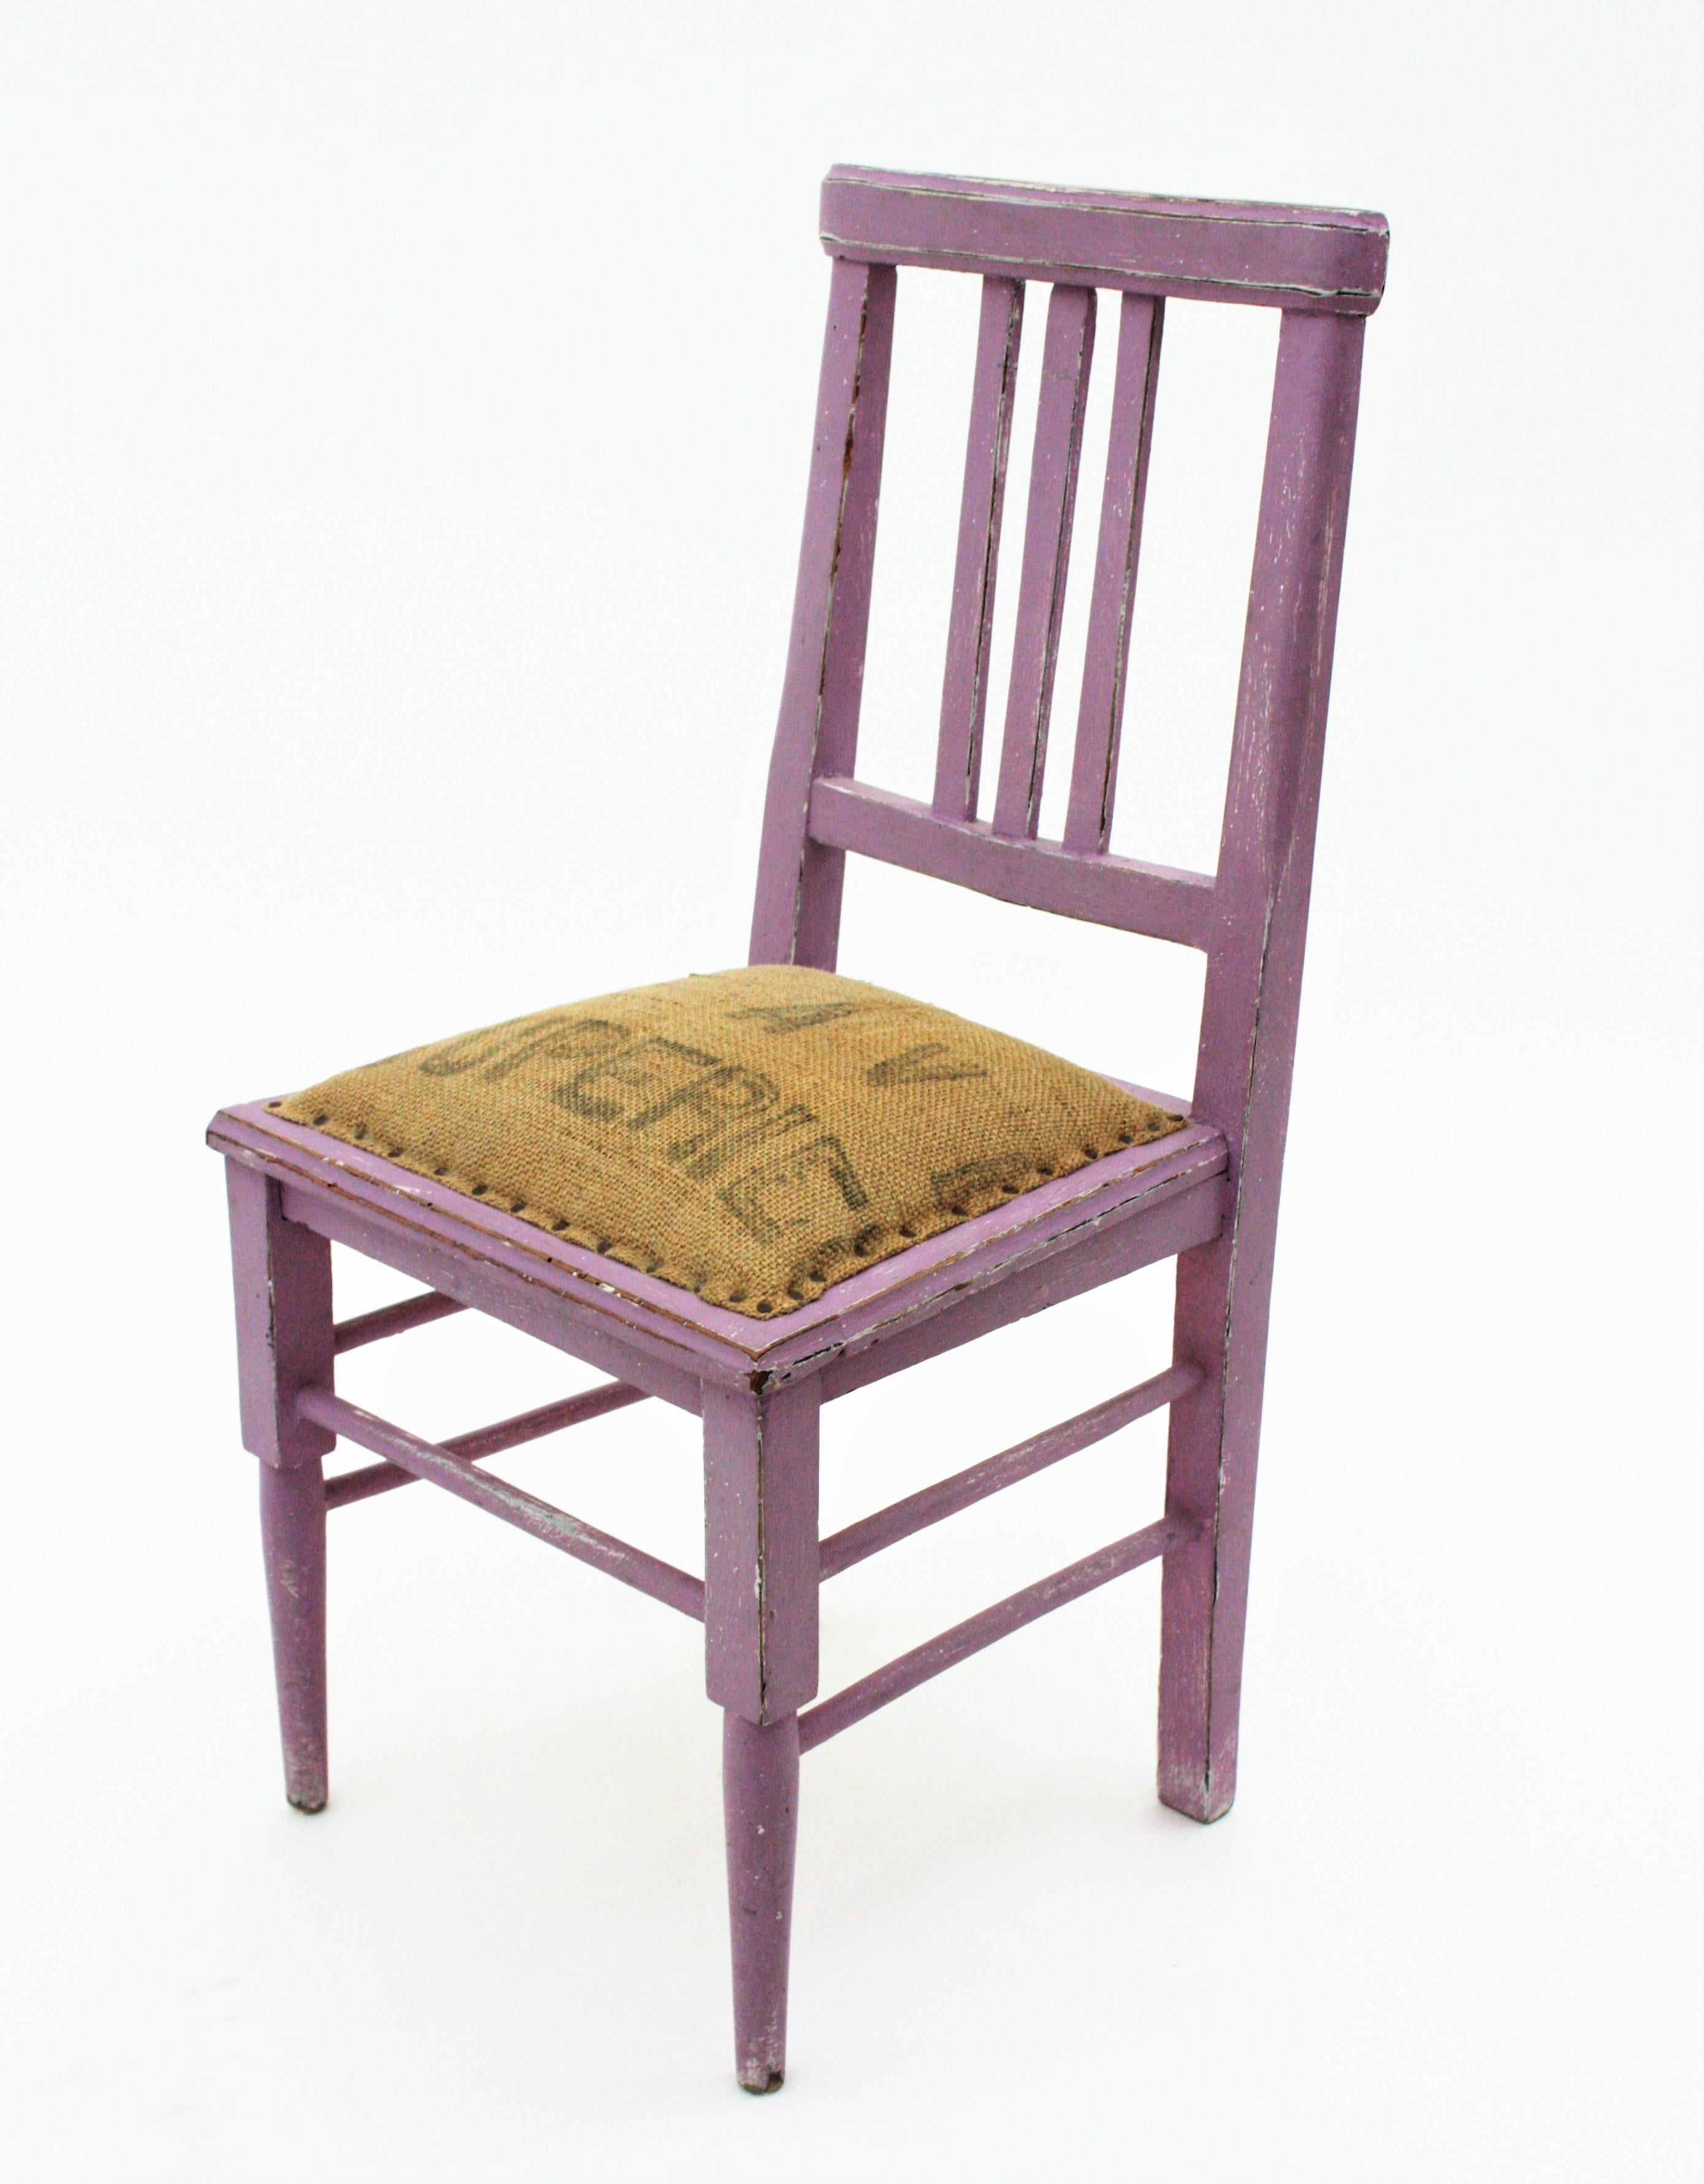 French Provencal Kids Chair in Lavender Patina and Burlap Seat For Sale 3